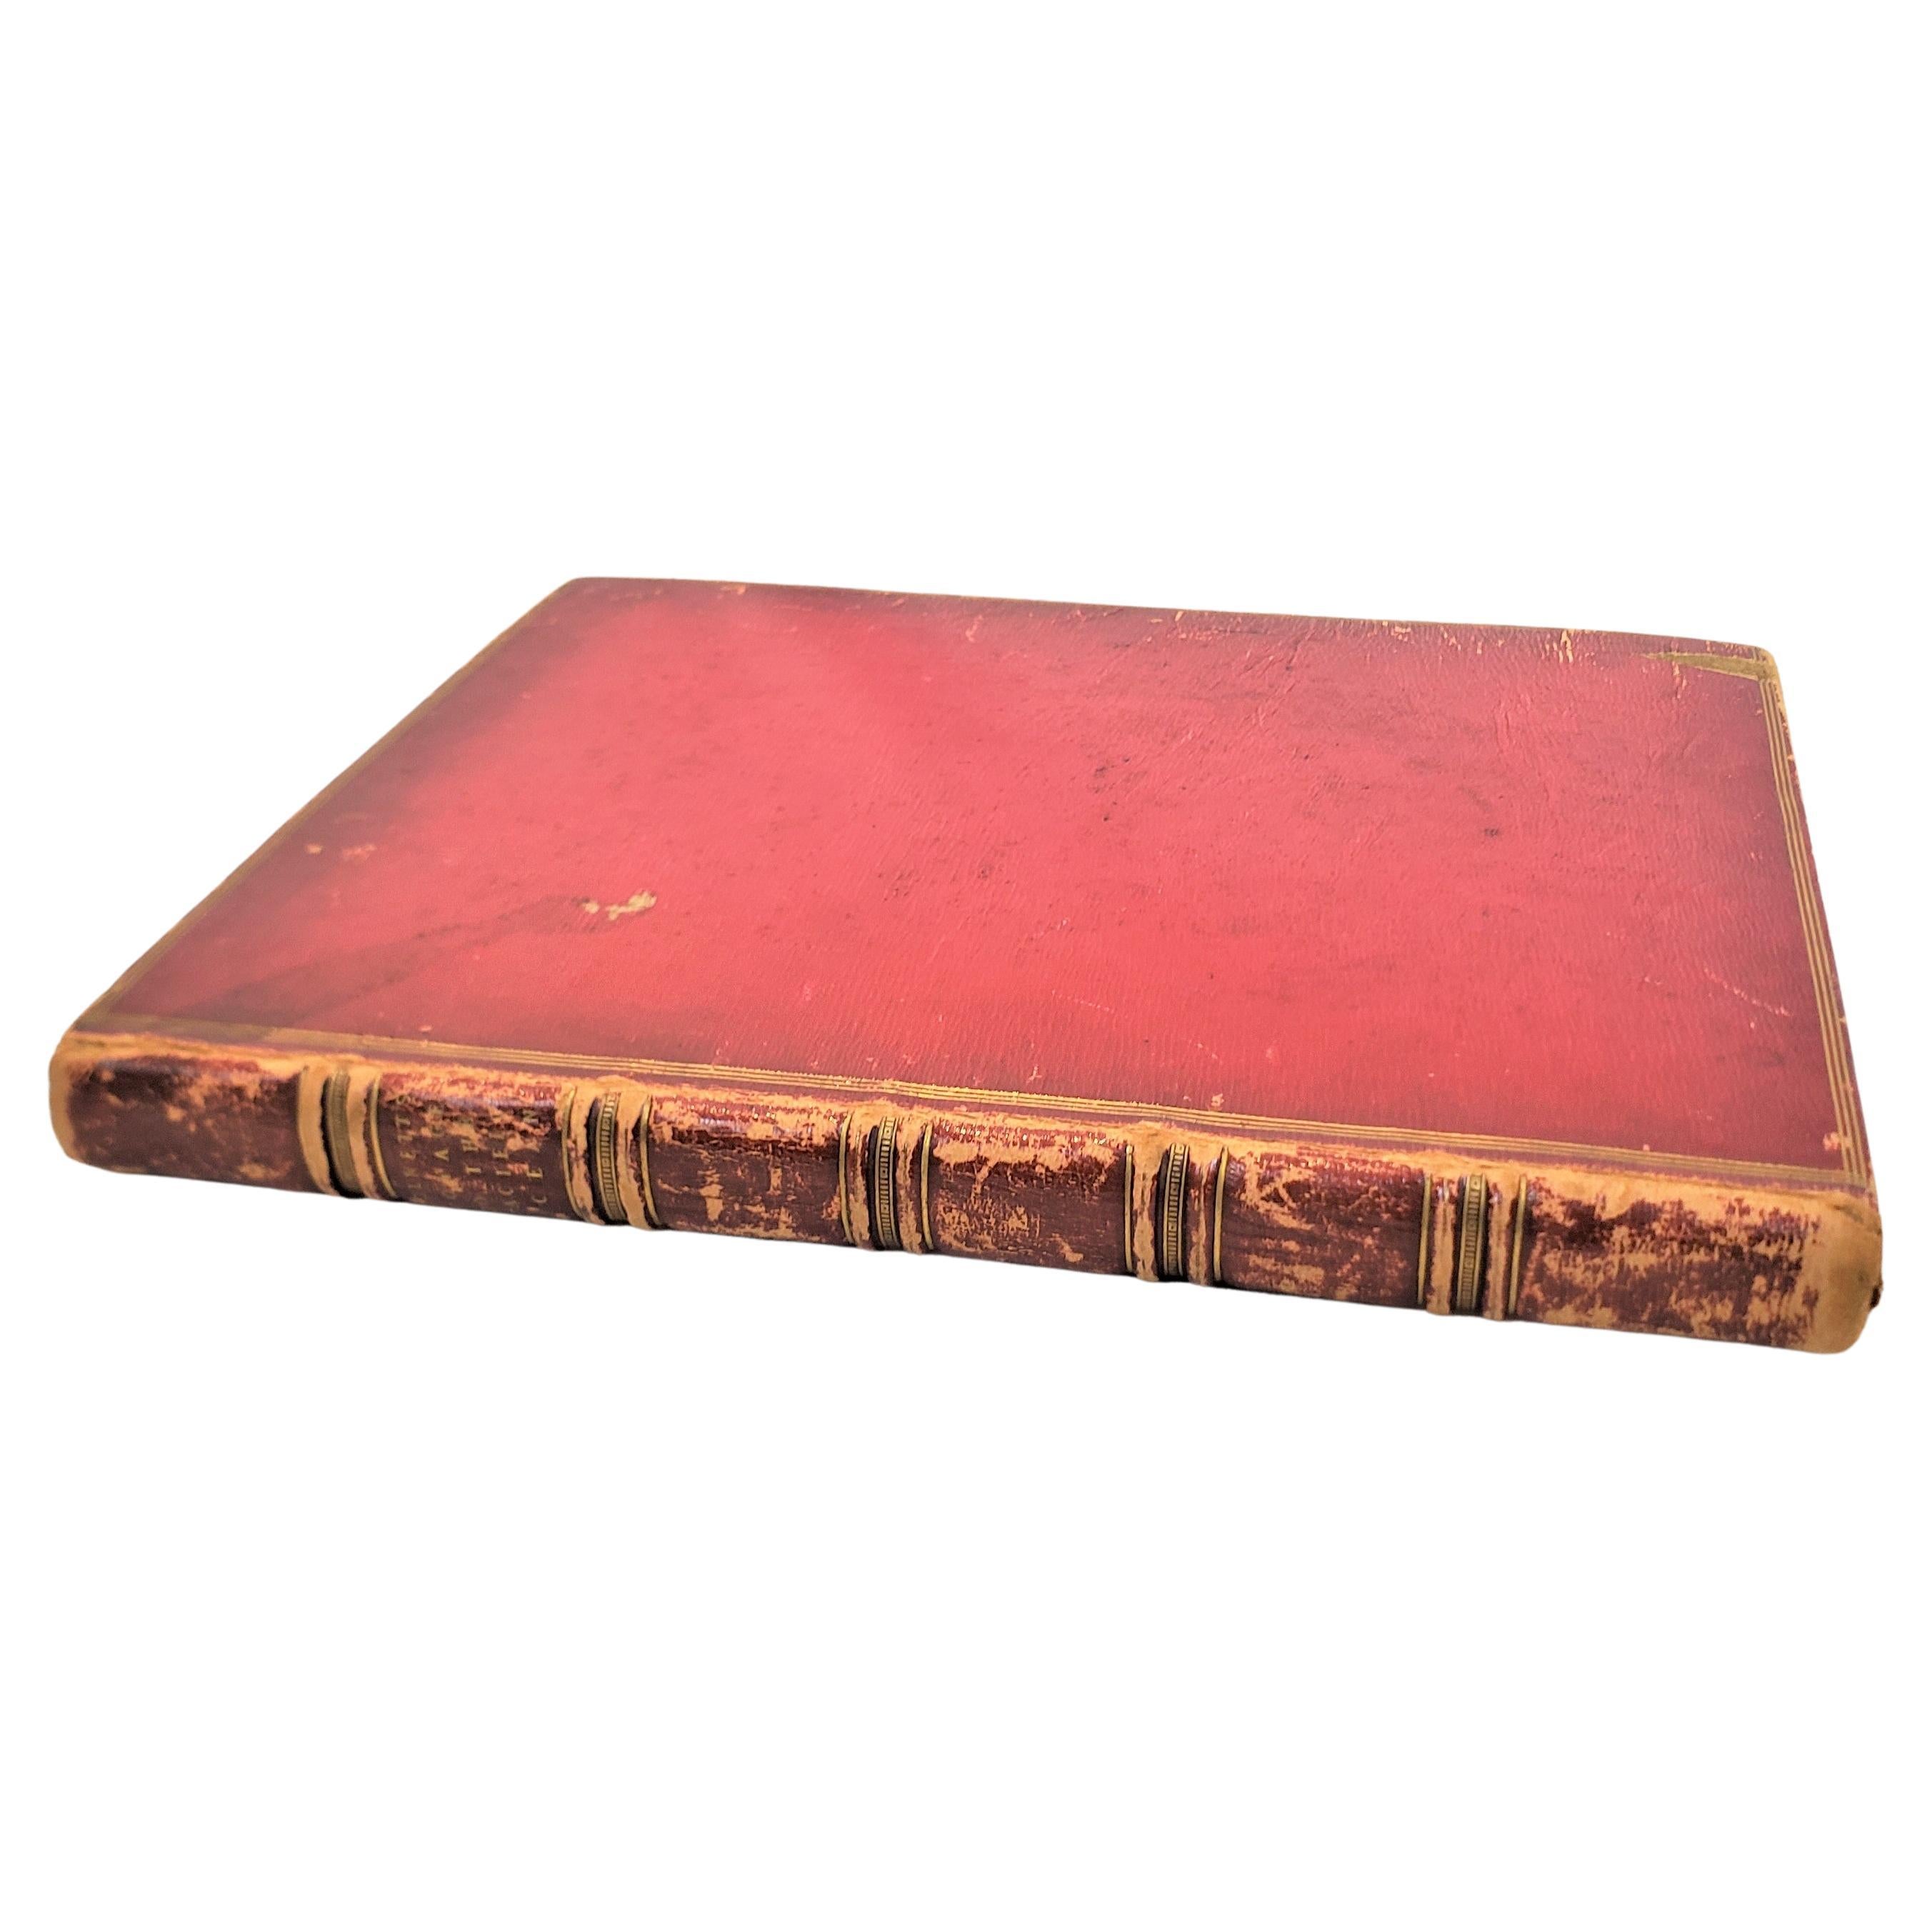 Antikes James Colnett-Buch „A Voyage to the South Atlantic & Round Cape“, 1798 im Angebot